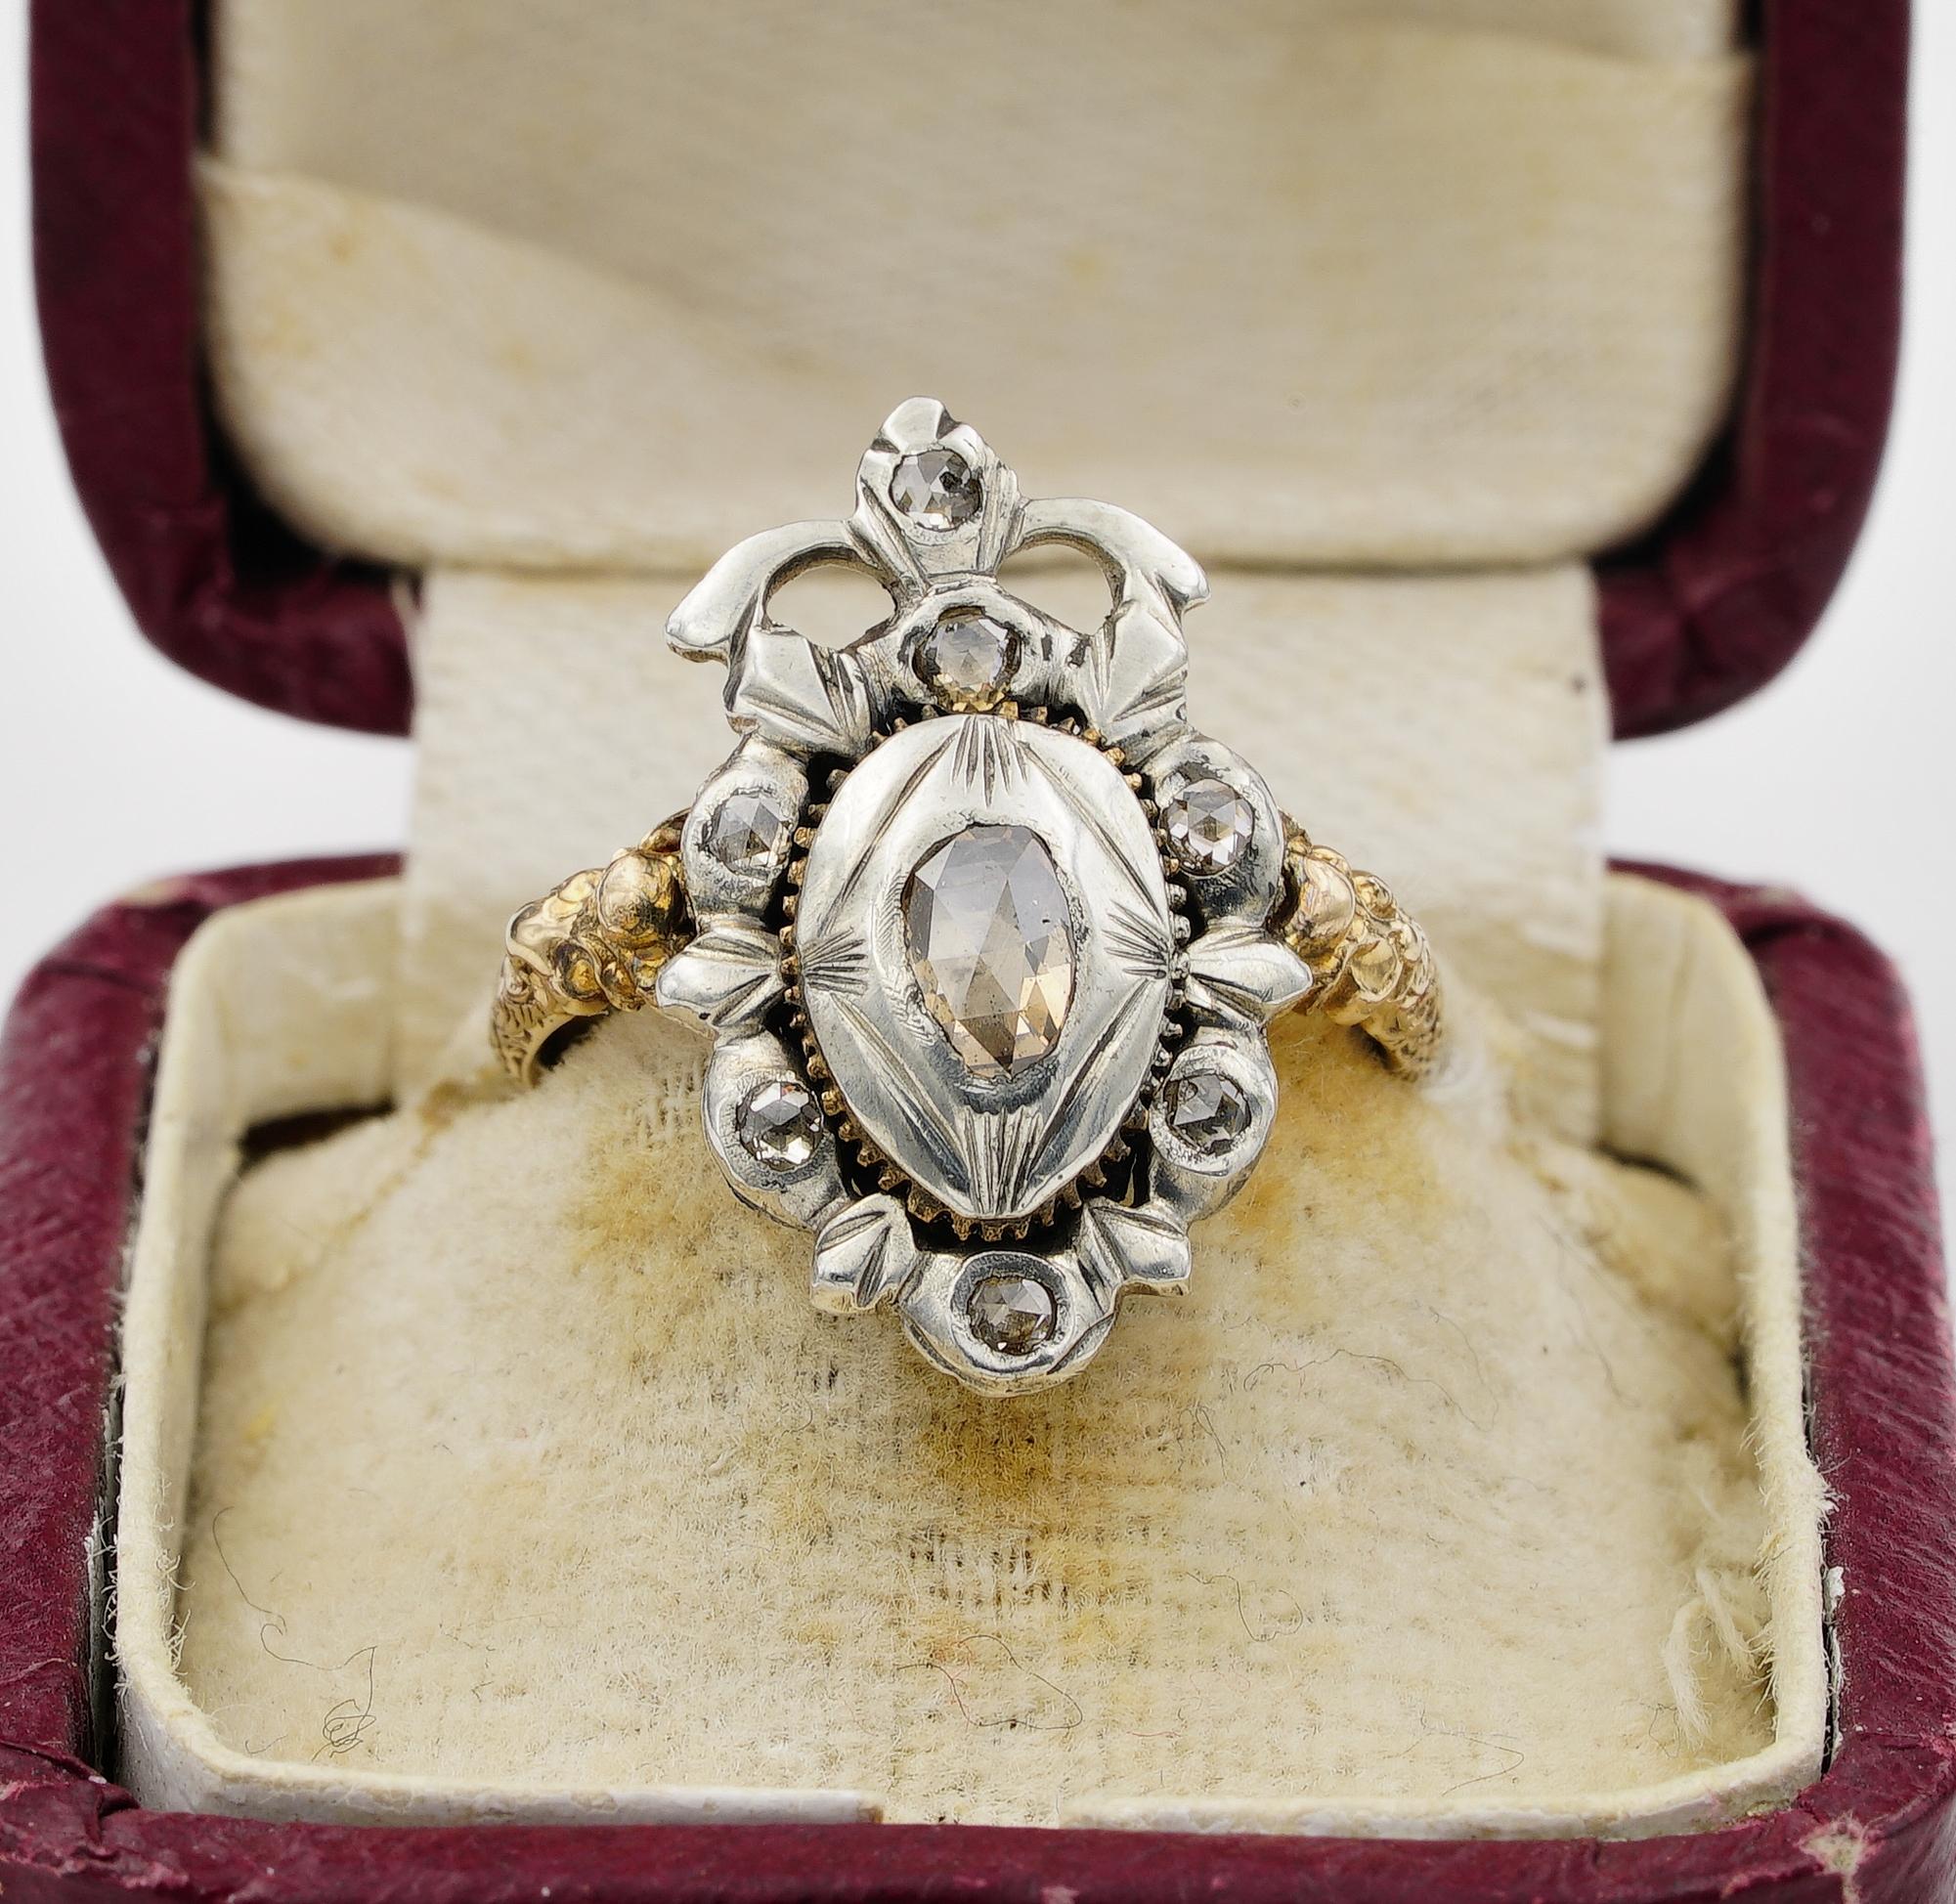 Passion and Endurance
Meaningful and symbolic 1780 ca Georgian crowned heart ring, rare love token or engagement ring quite touching conception of the past history to our days, undoubtedly revealing a love story of long ago
Hand crafted of solid